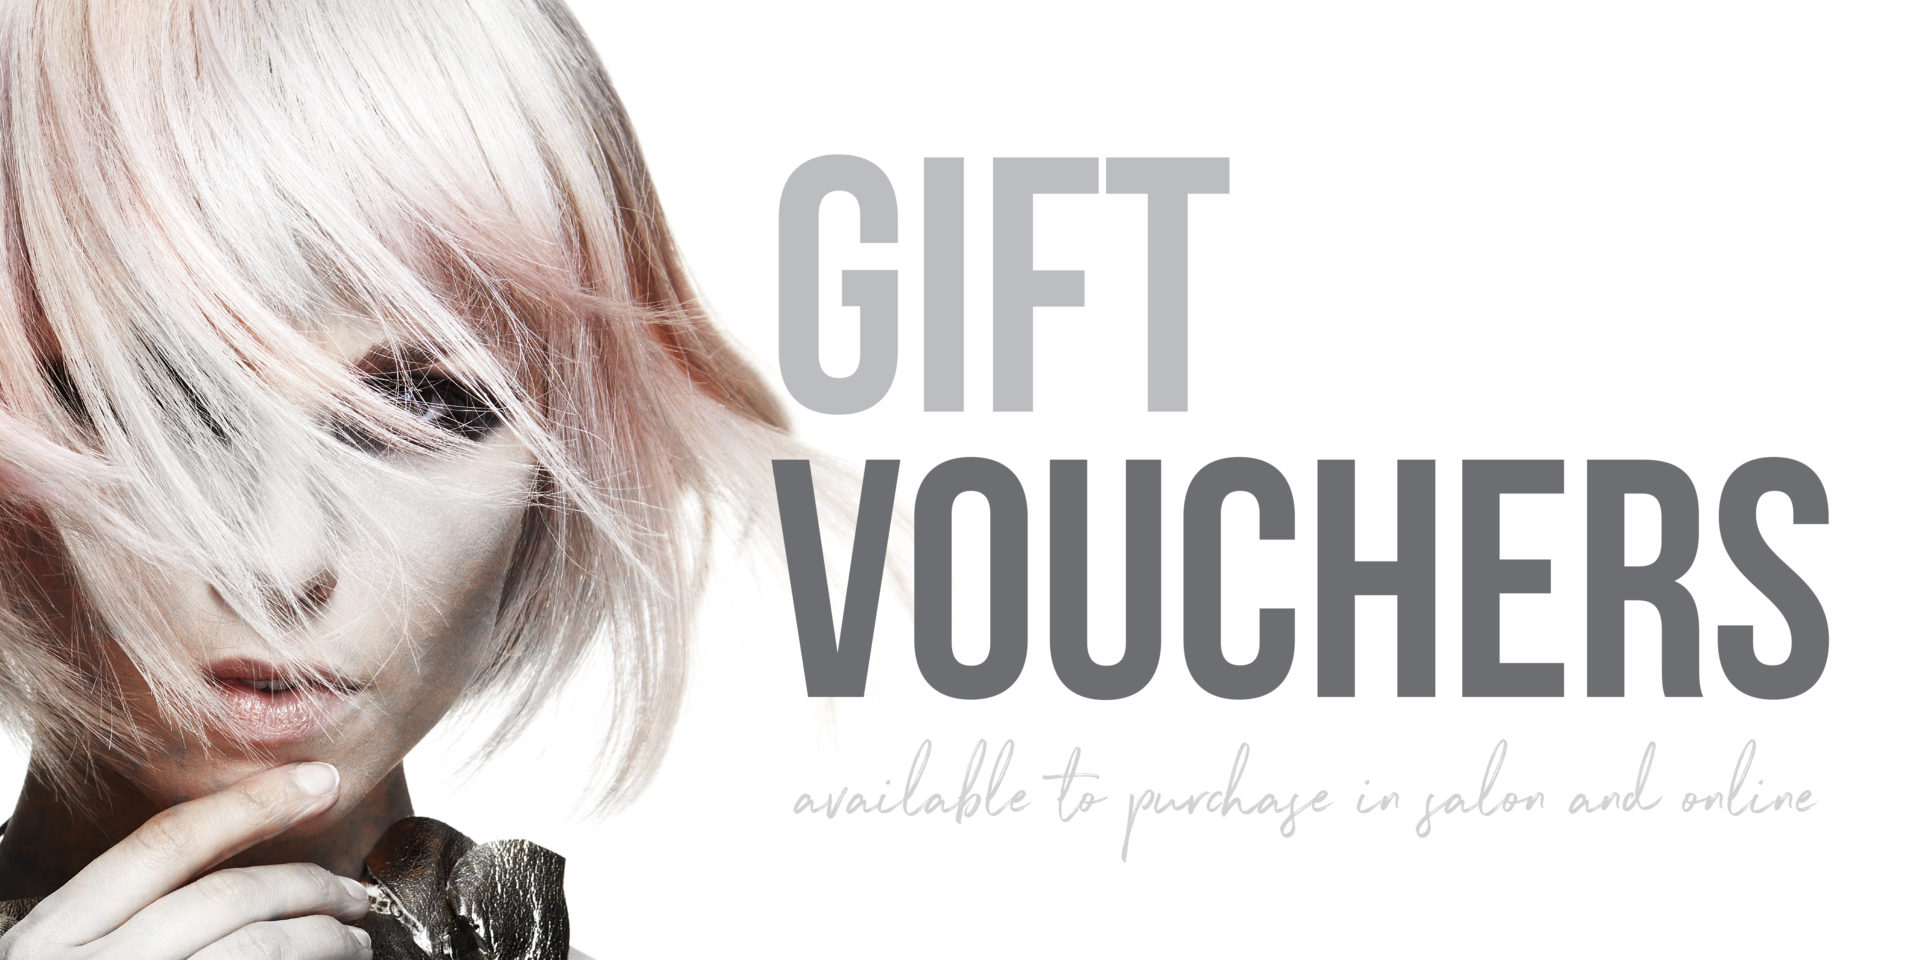 GIFT VOUCHERS AT WILES HAIR STUDIOS IN NORTHAMPTON